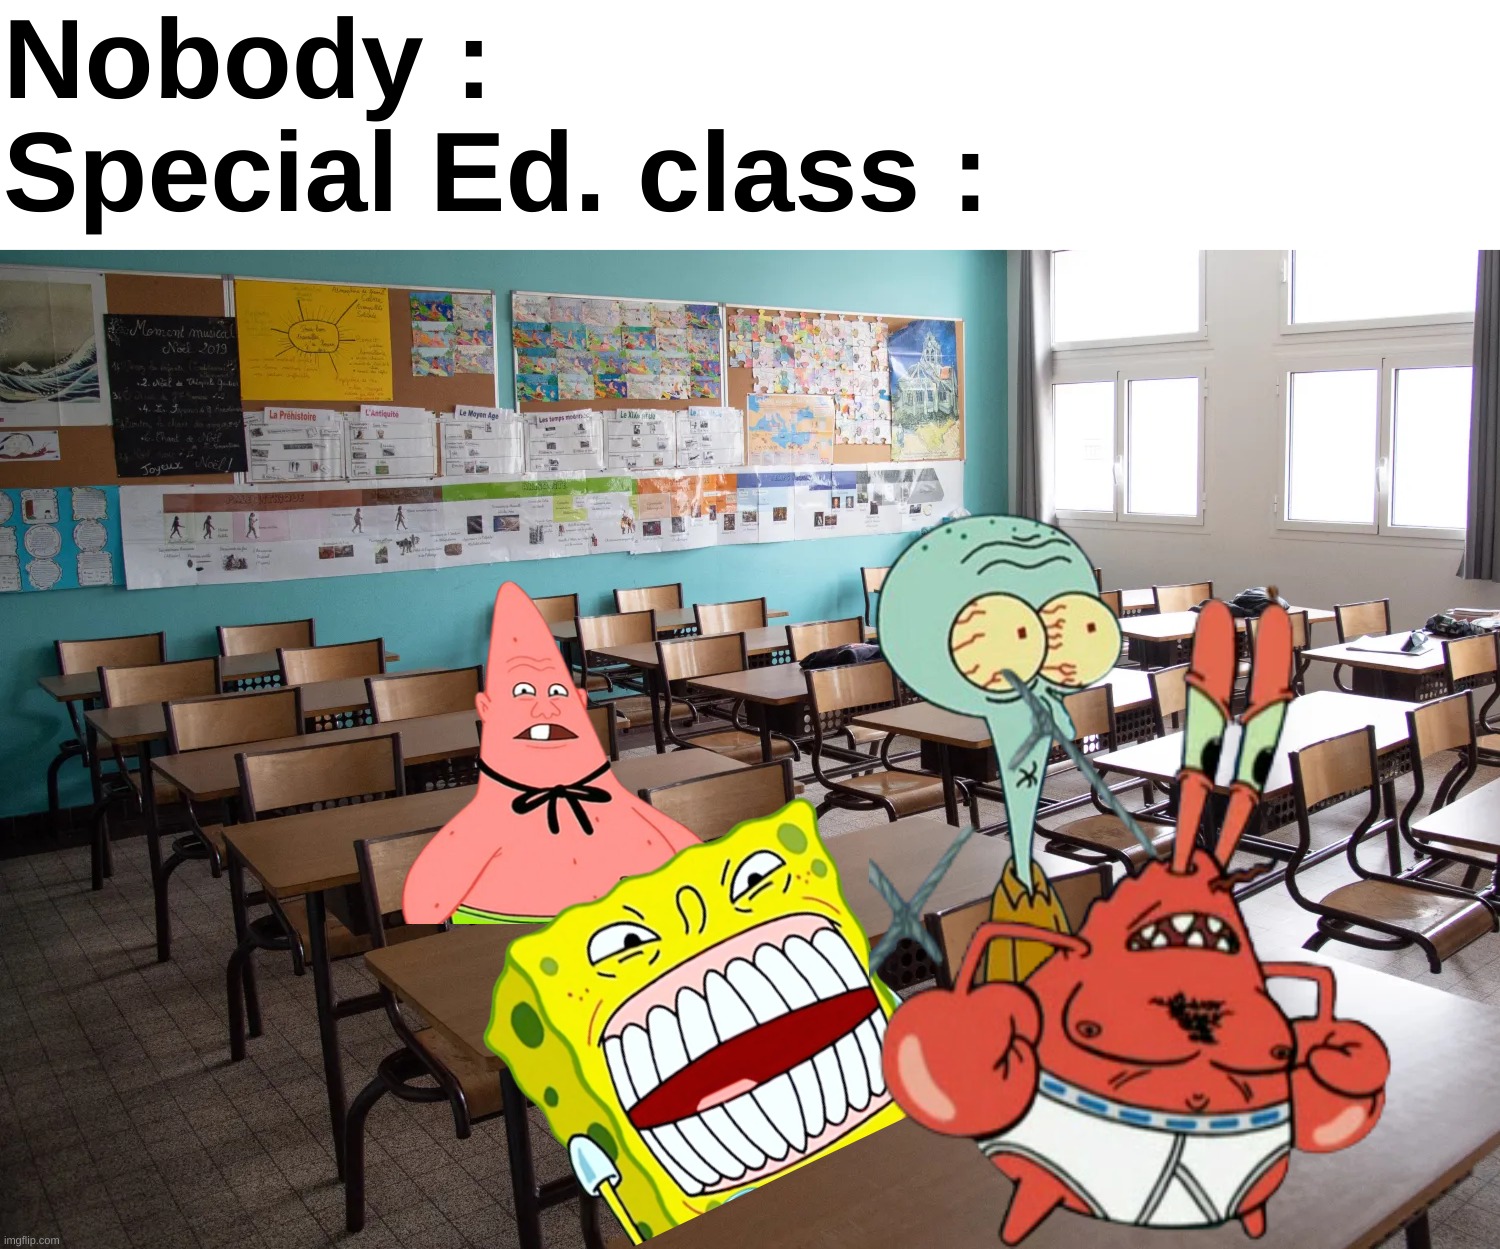 Fr !1!1 (Also it's just a meme don't get mad about it) | Nobody :
Special Ed. class : | image tagged in memes,funny,real,school,special ed,front page plz | made w/ Imgflip meme maker